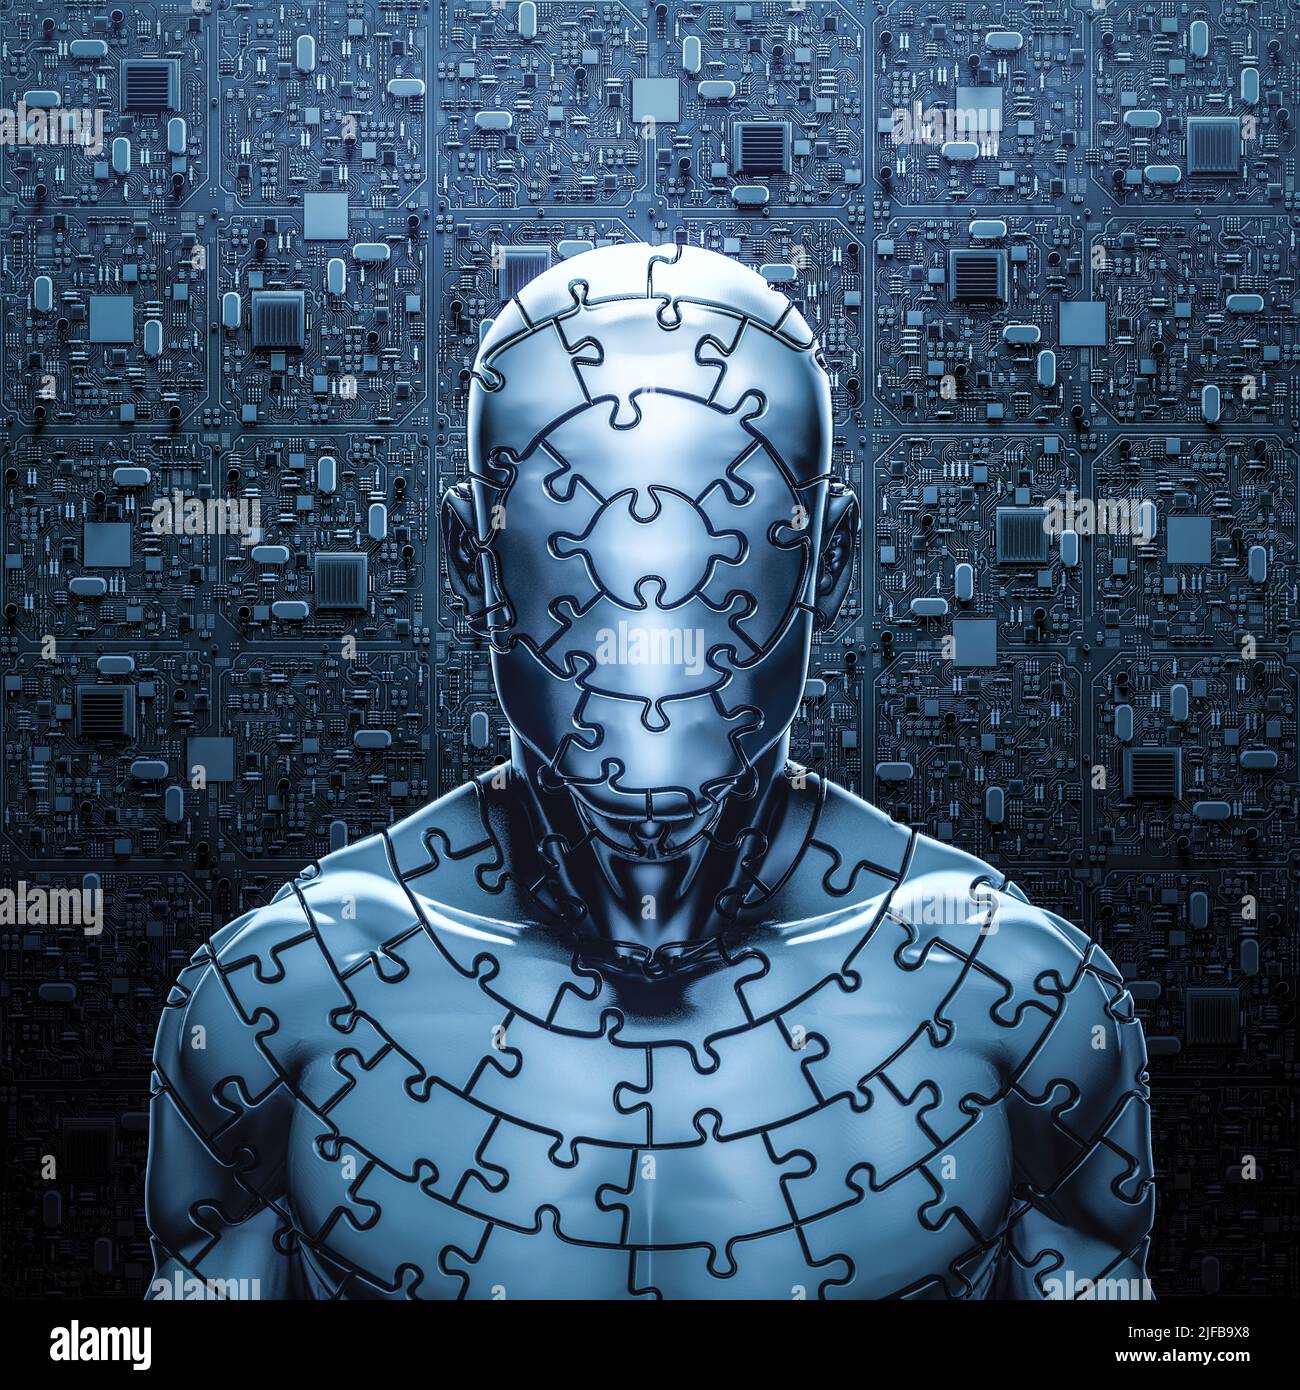 Mystery puzzle man - 3D illustration of dark mysterious male figure made of jigsaw pieces with abstract computer circuit board background Stock Photo